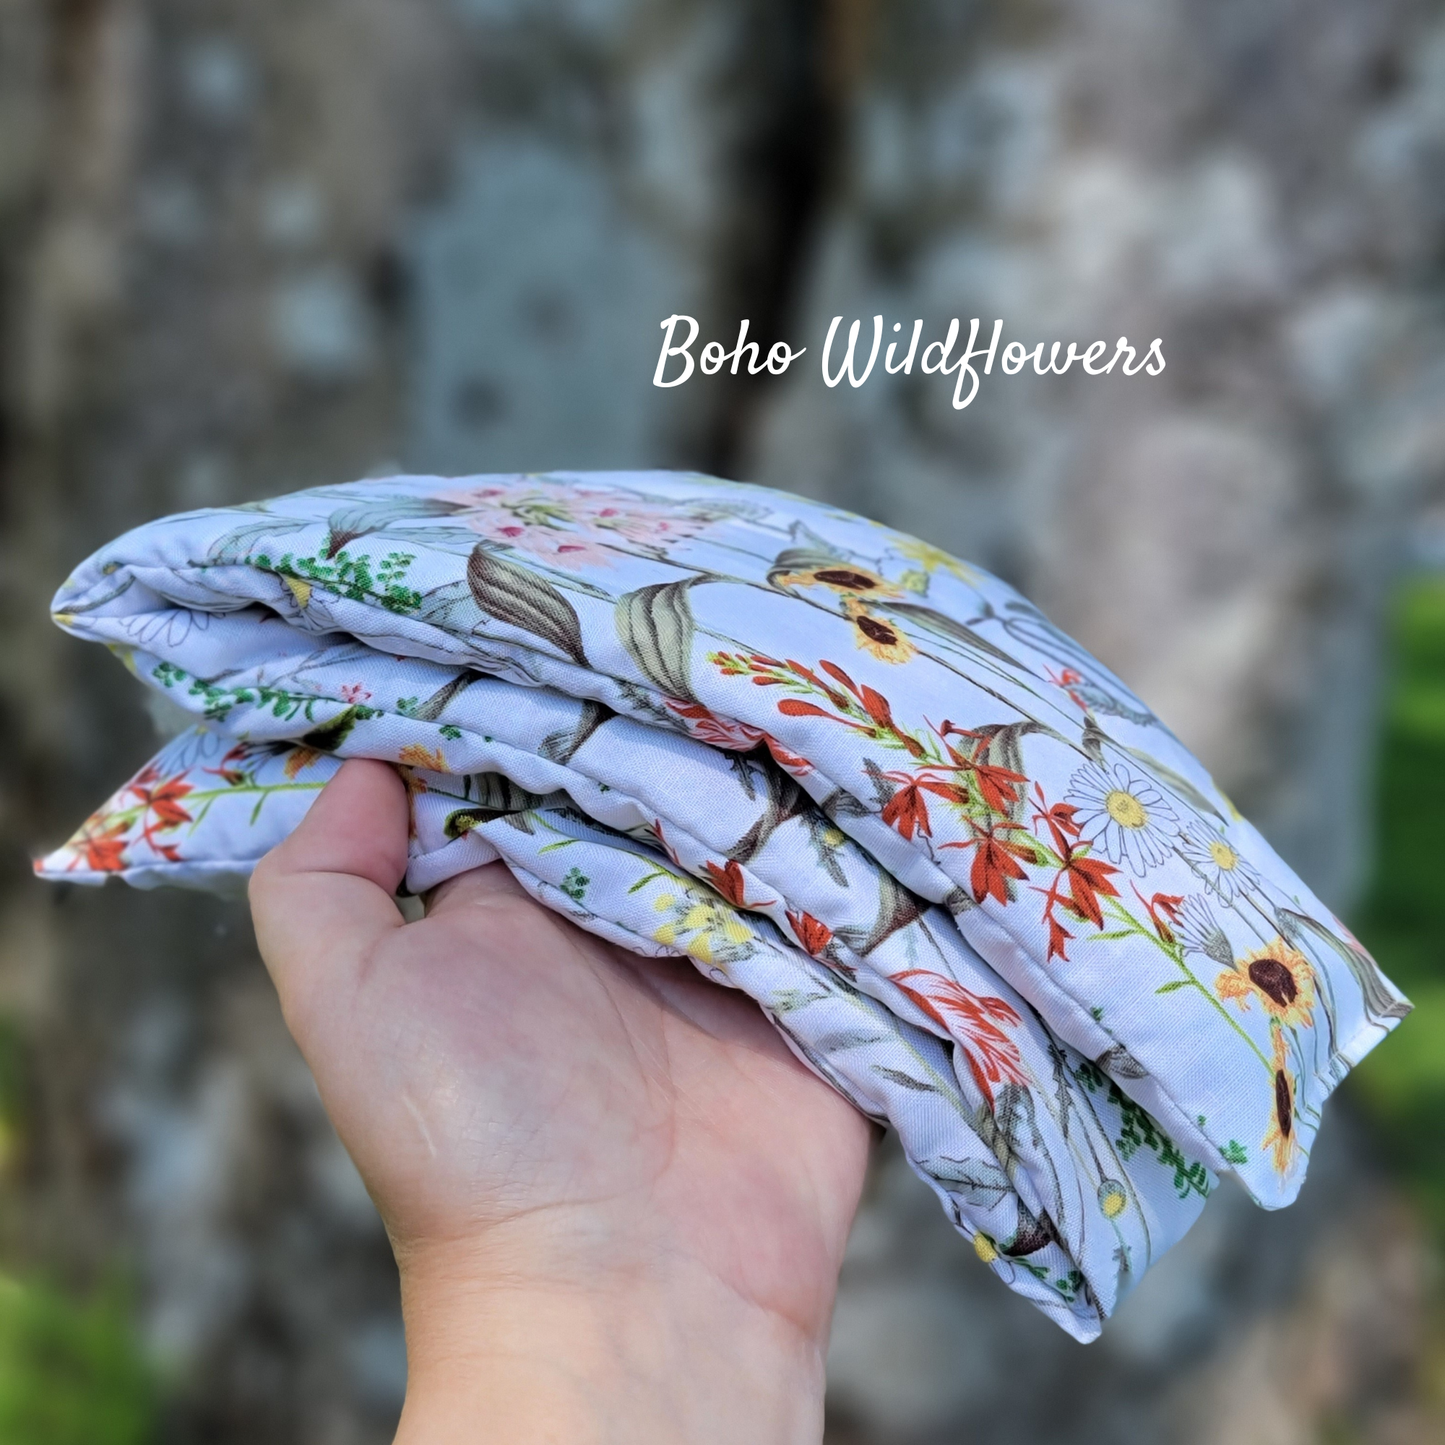 Aromatherapy Hot/Cold Weighted Neck Wraps - Patterns: Rice/Flaxseed Mix / Lavender & Peppermint / Floral Stripes